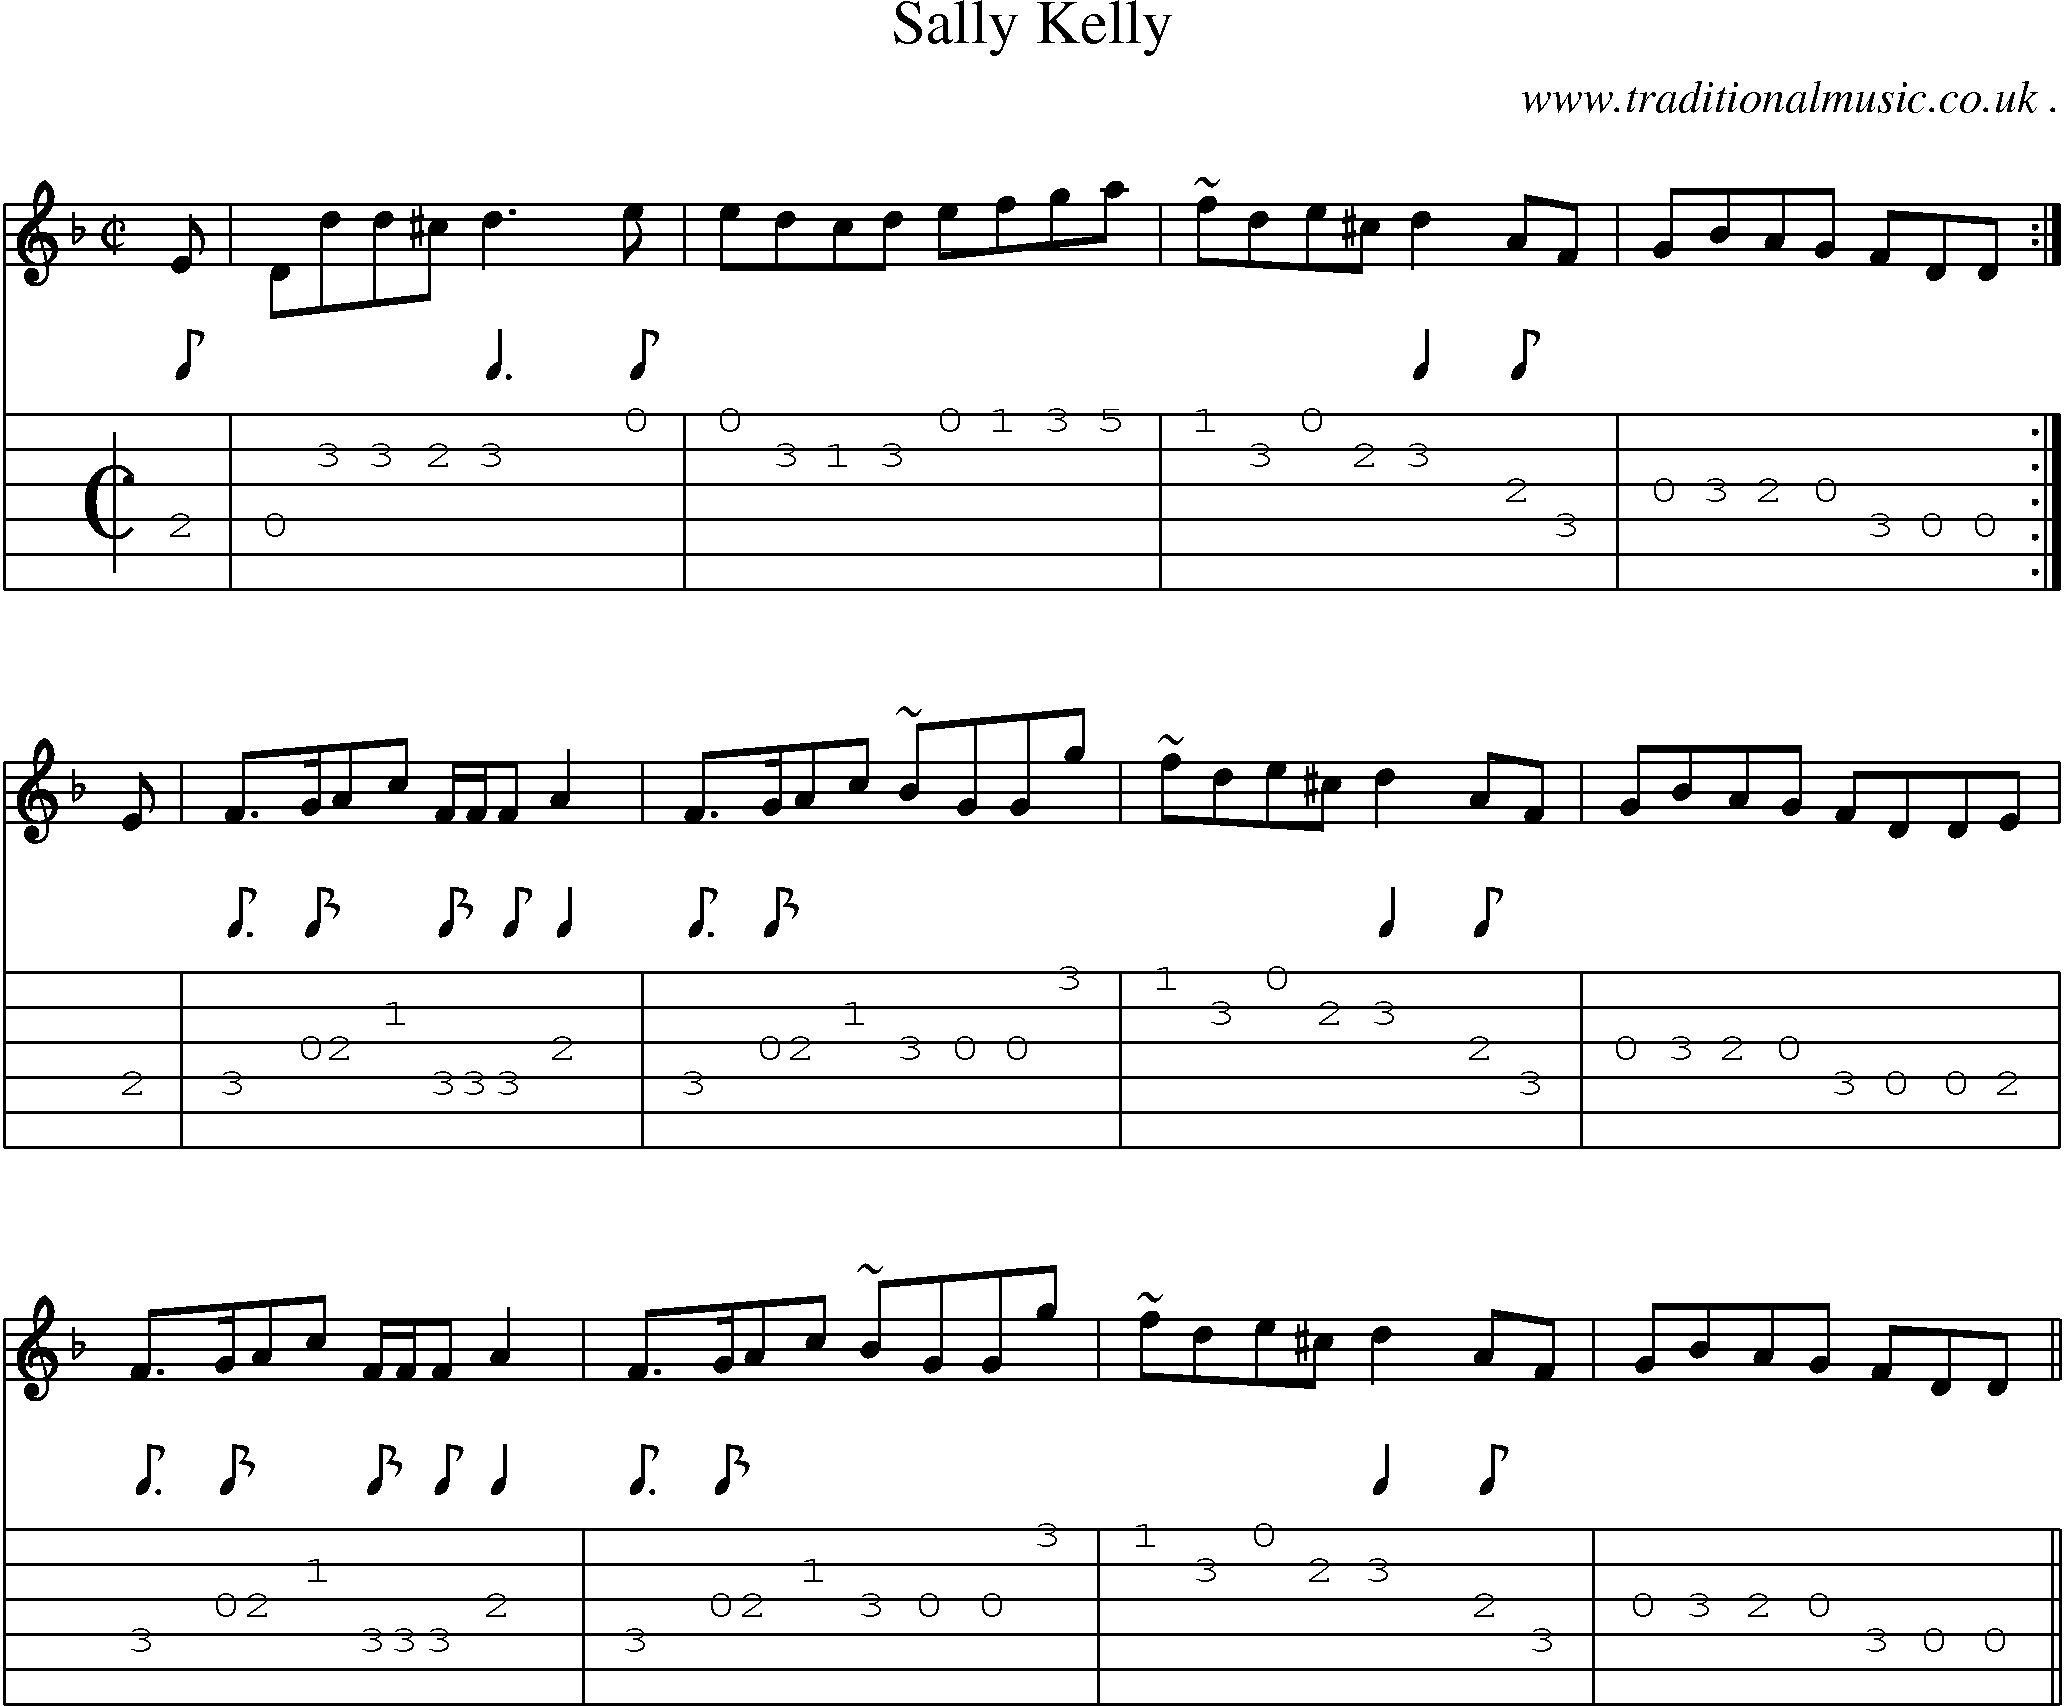 Sheet-music  score, Chords and Guitar Tabs for Sally Kelly